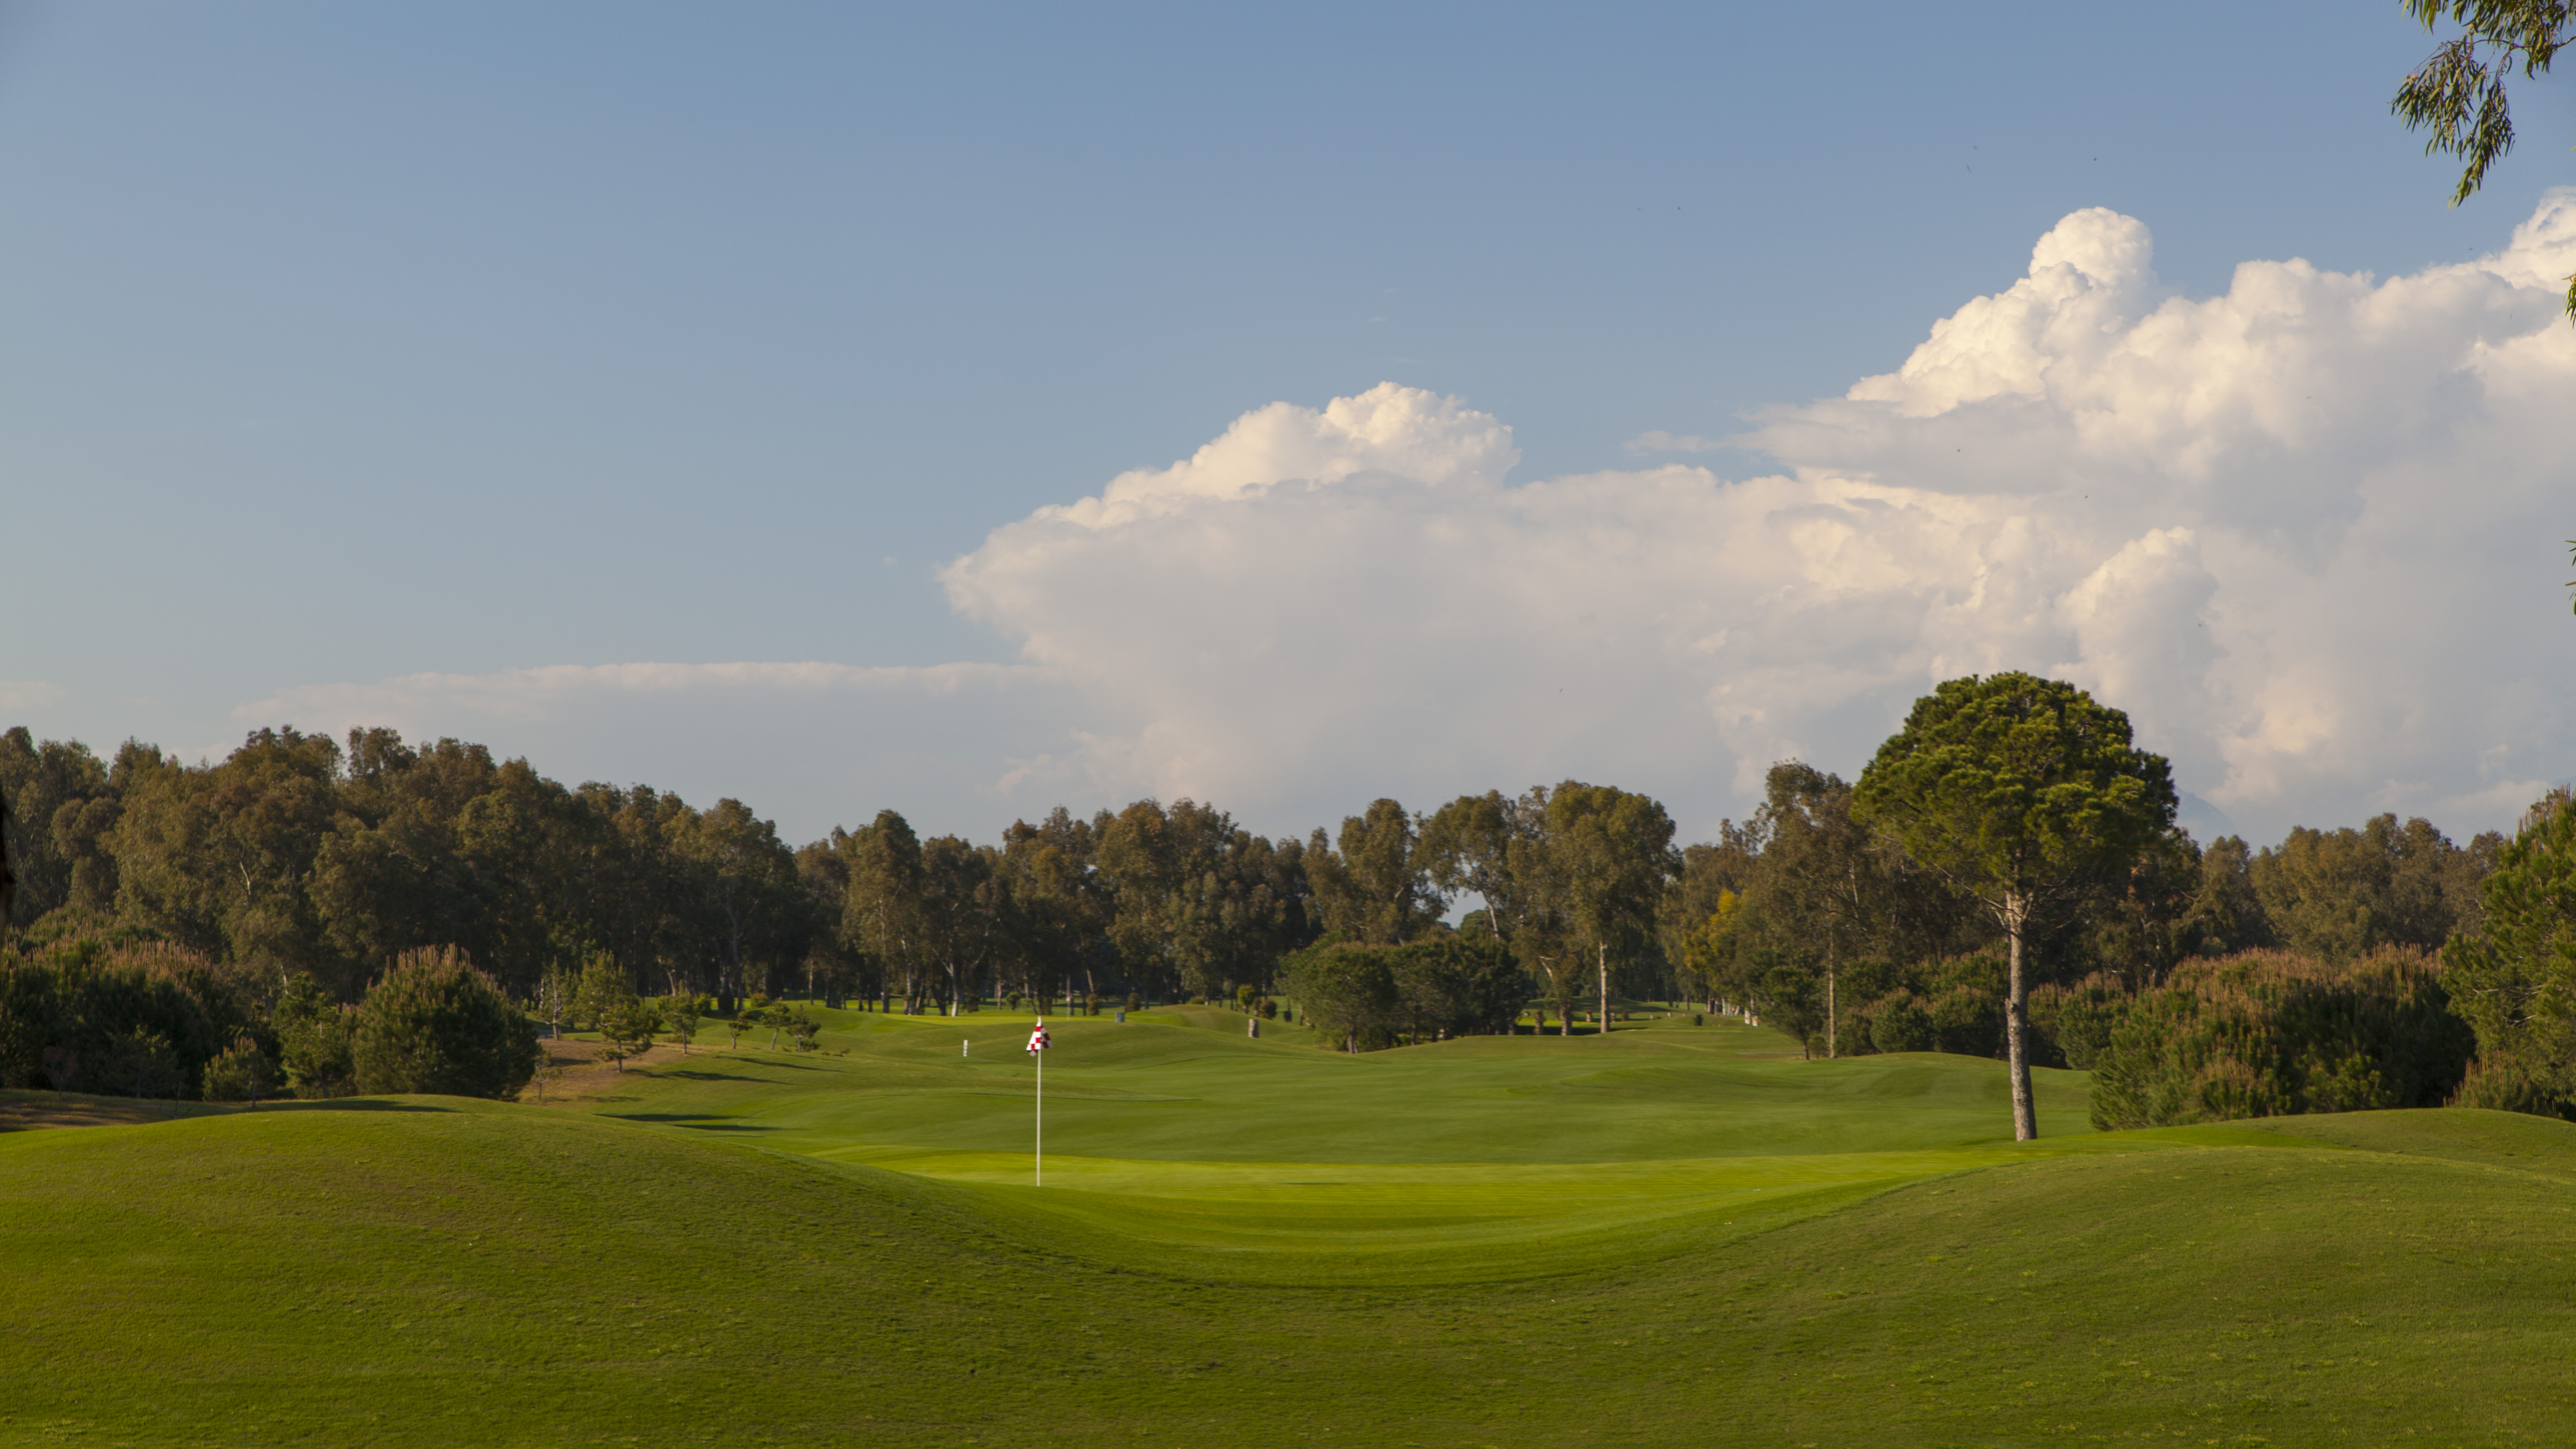 The Sultan course at Antalya golf club